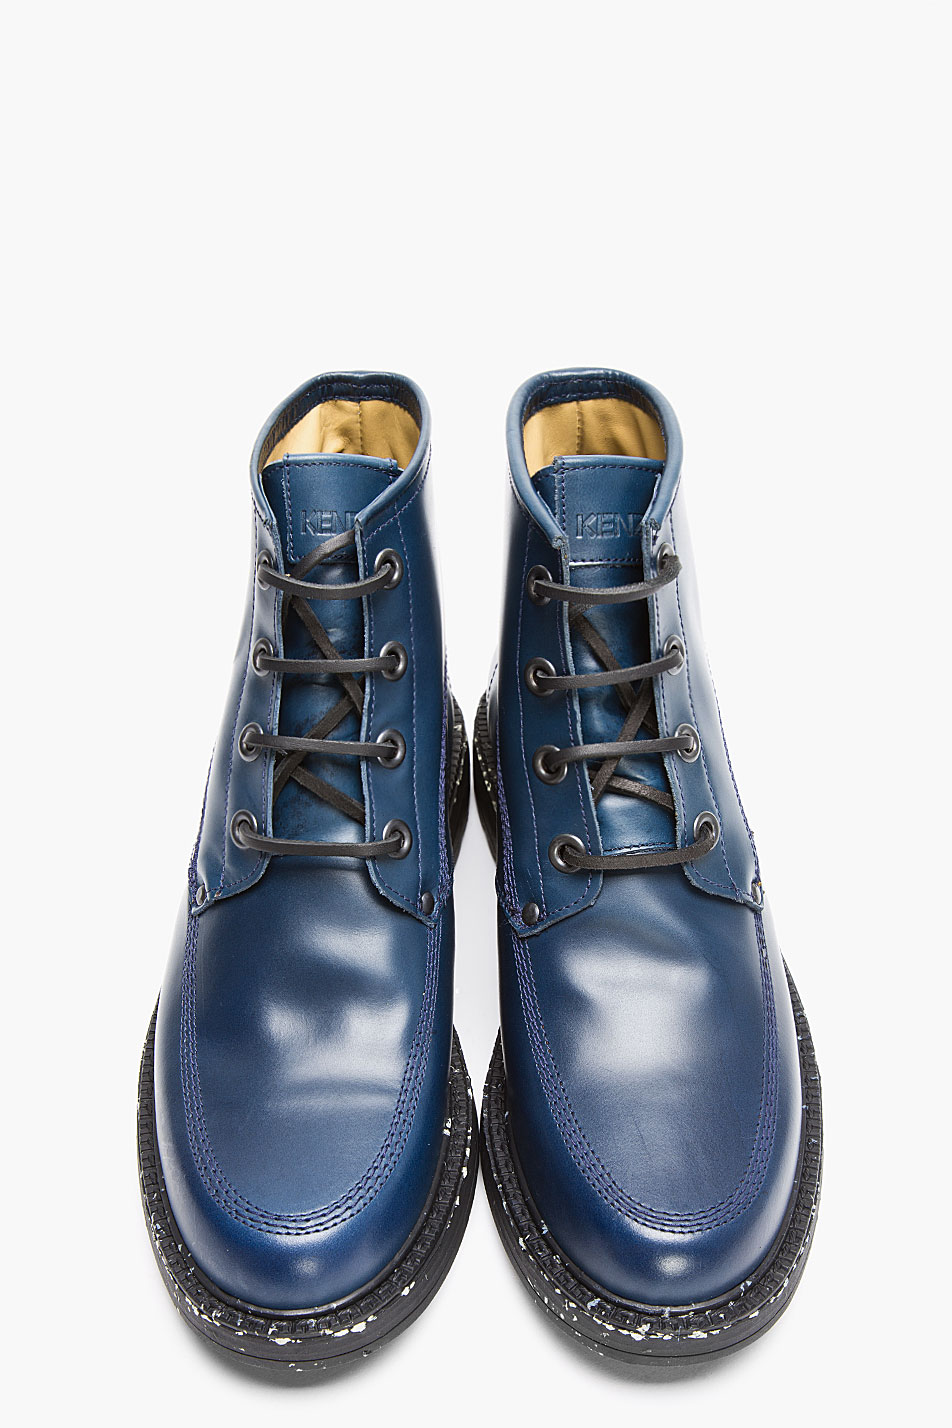 KENZO Dark Teal Leather Speckled Ronnie Military Boots in Blue for Men ...